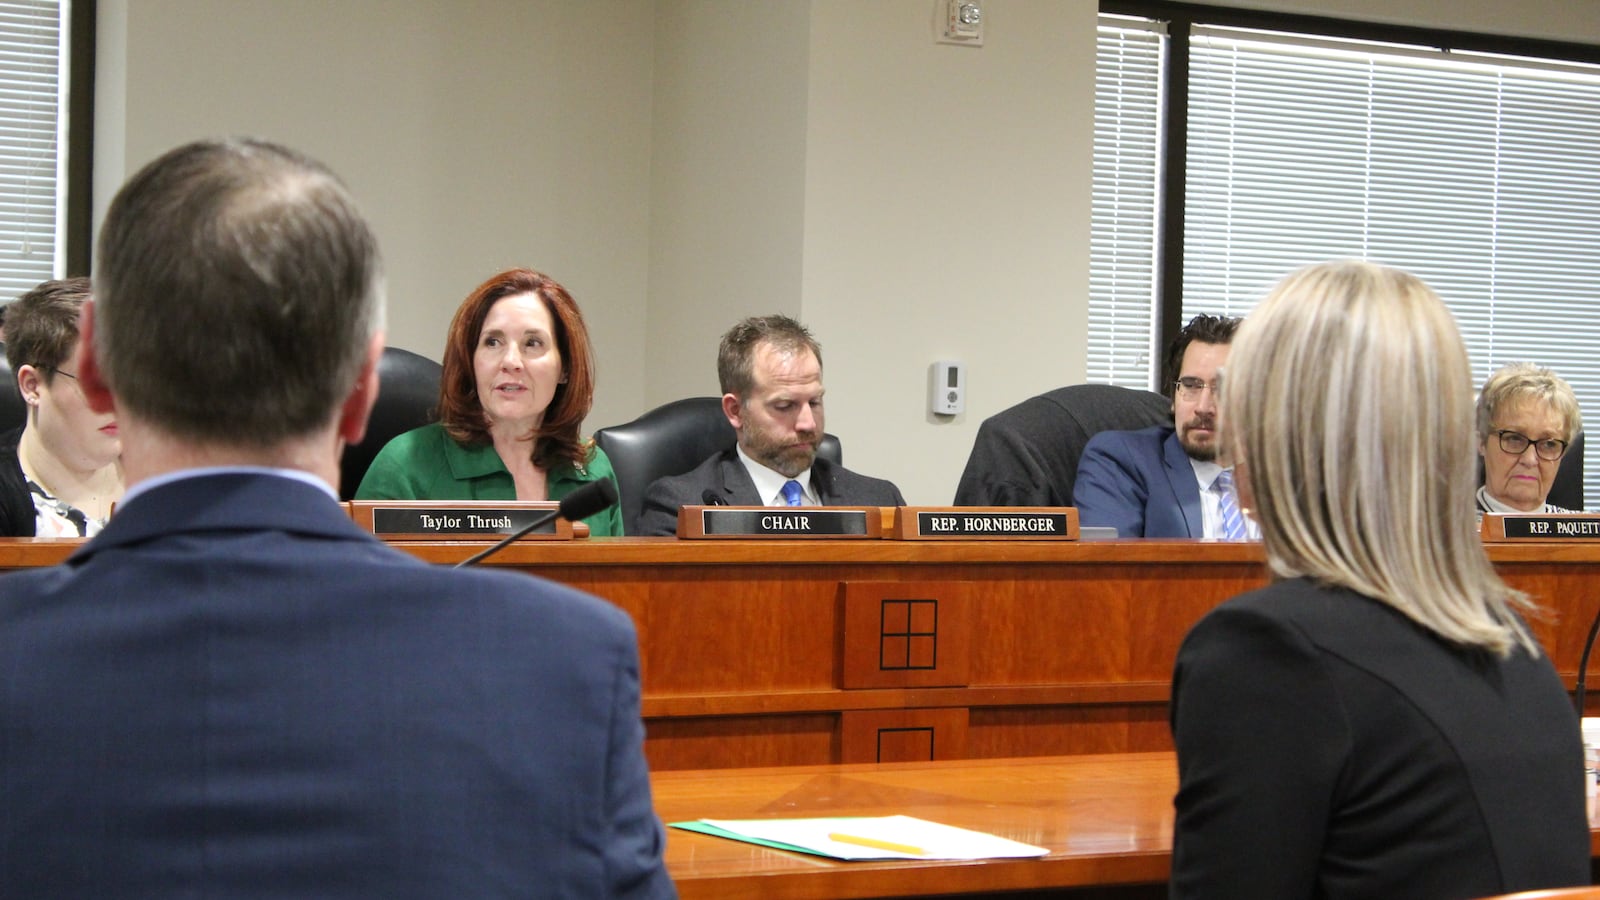 The Michigan House of Representatives education committee, and chair Pamela Hornberger, must decide whether to delay a scheduled increase in the role of test scores in teacher evaluations from 25 to 40 percent.